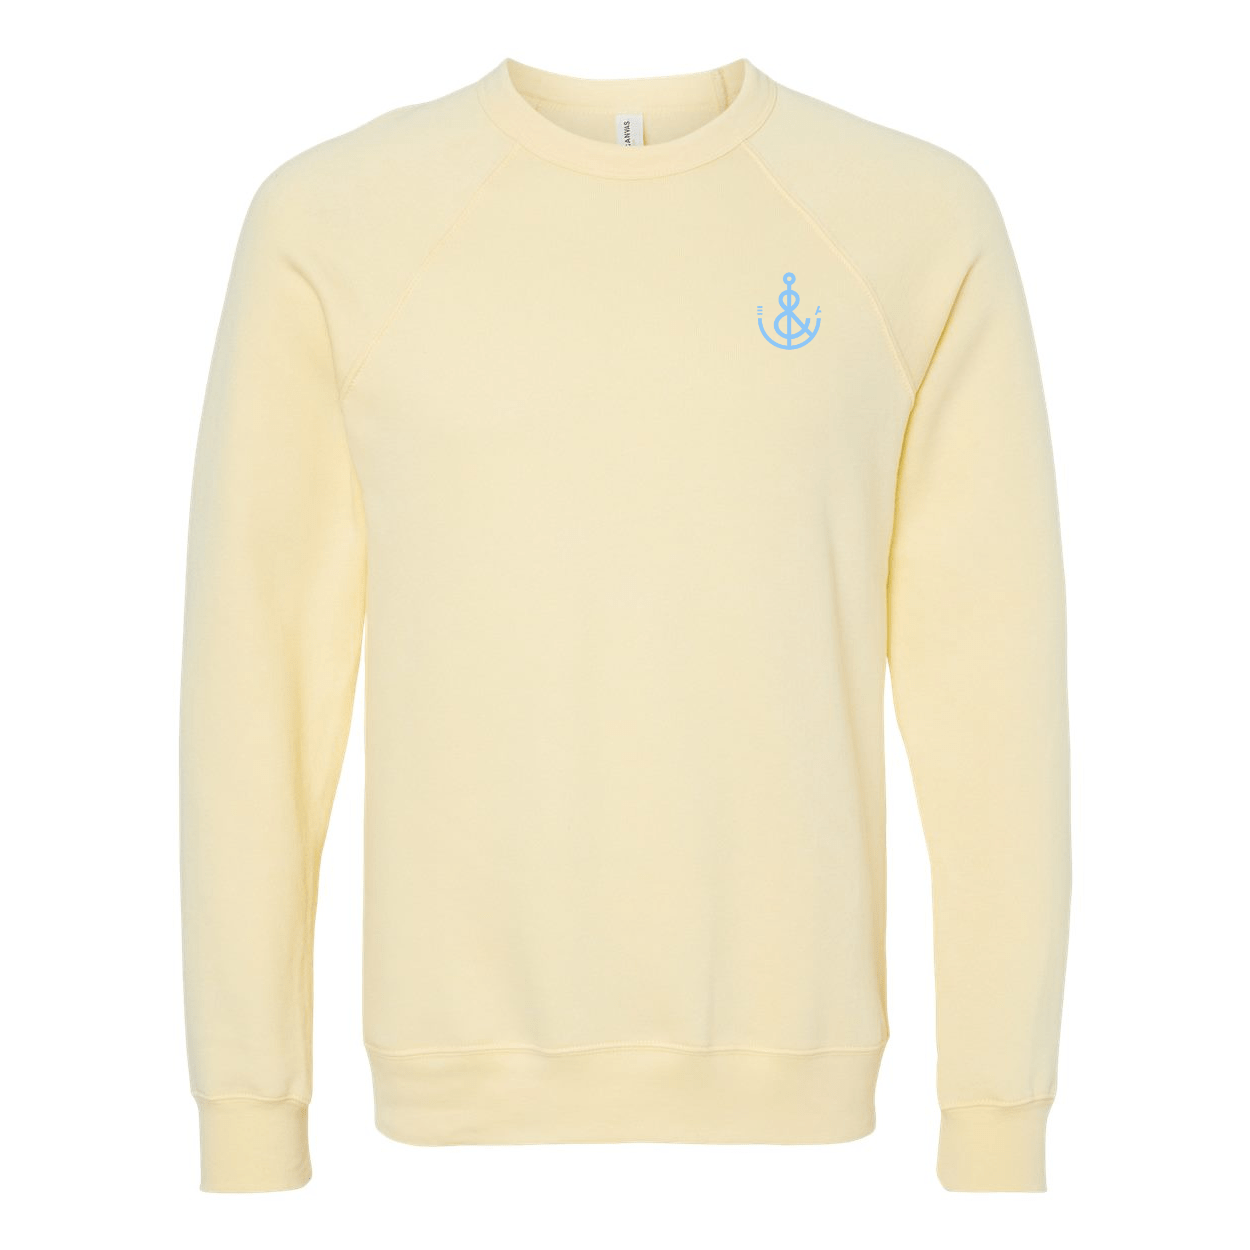 Unisex Embroidered Anchor Crewneck- Pale Yellow